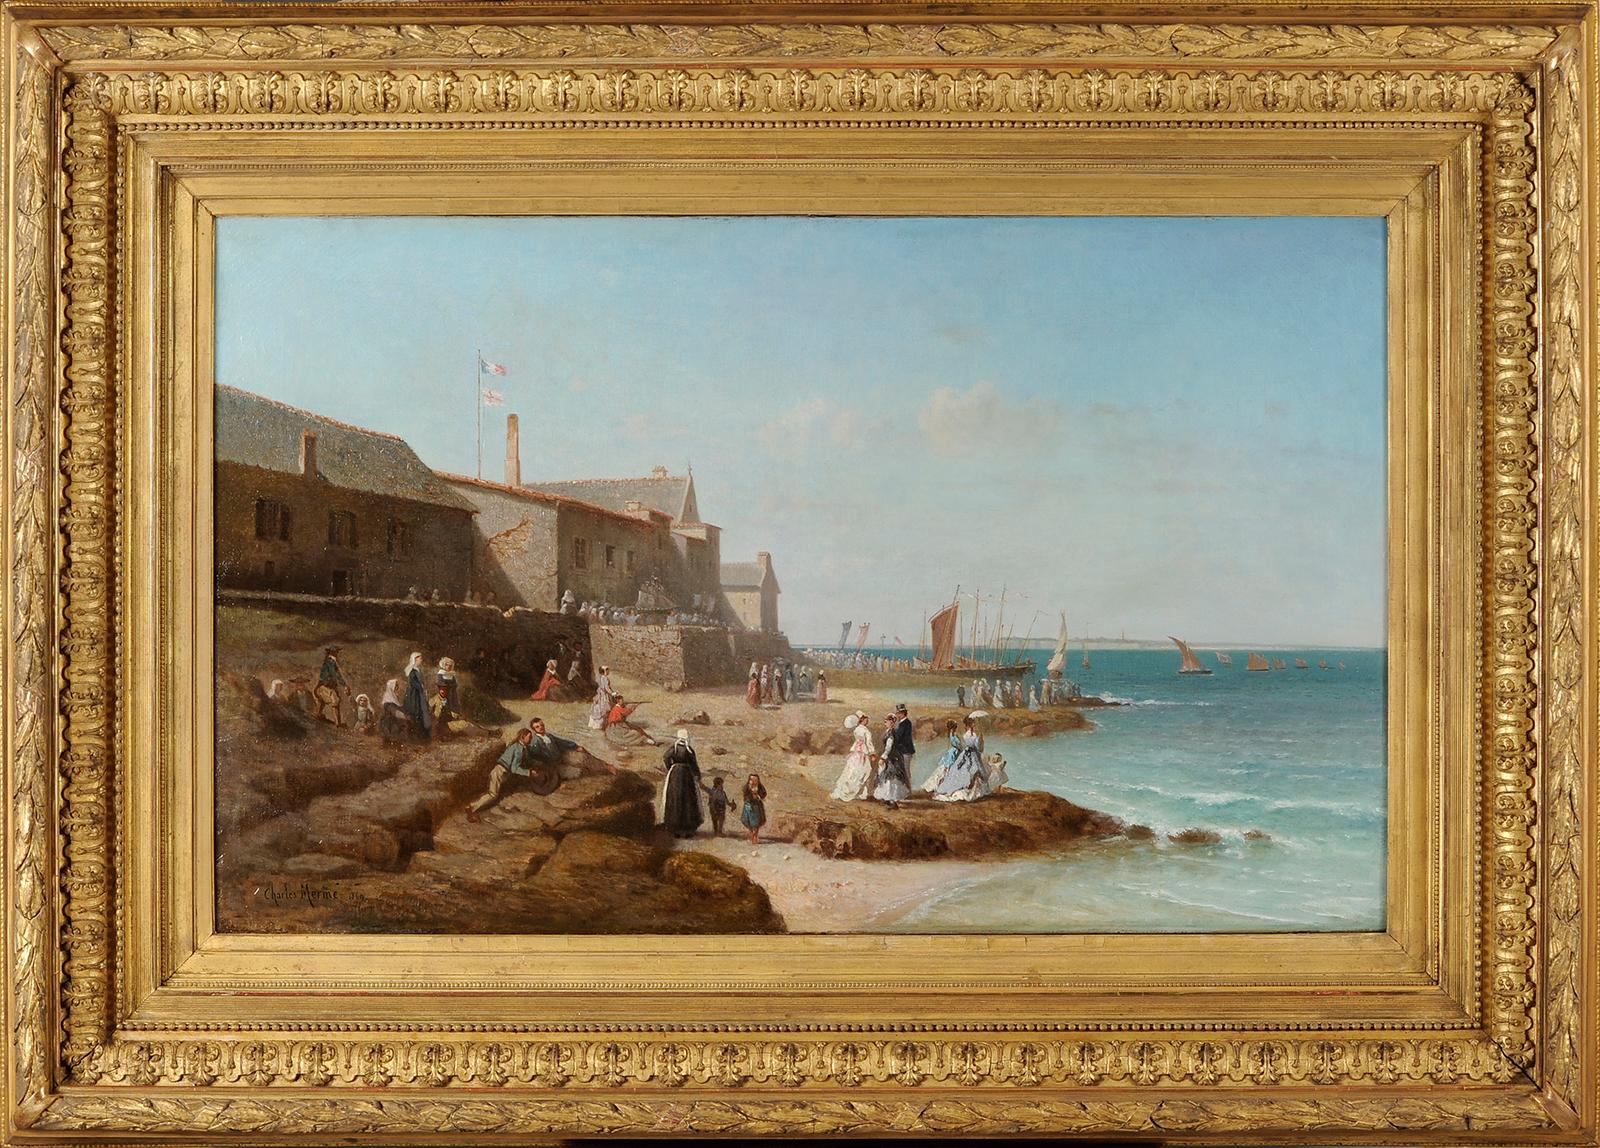 Charles Merme (1818-1869) The blessing of Coureau de Groix in Larmor Brittany